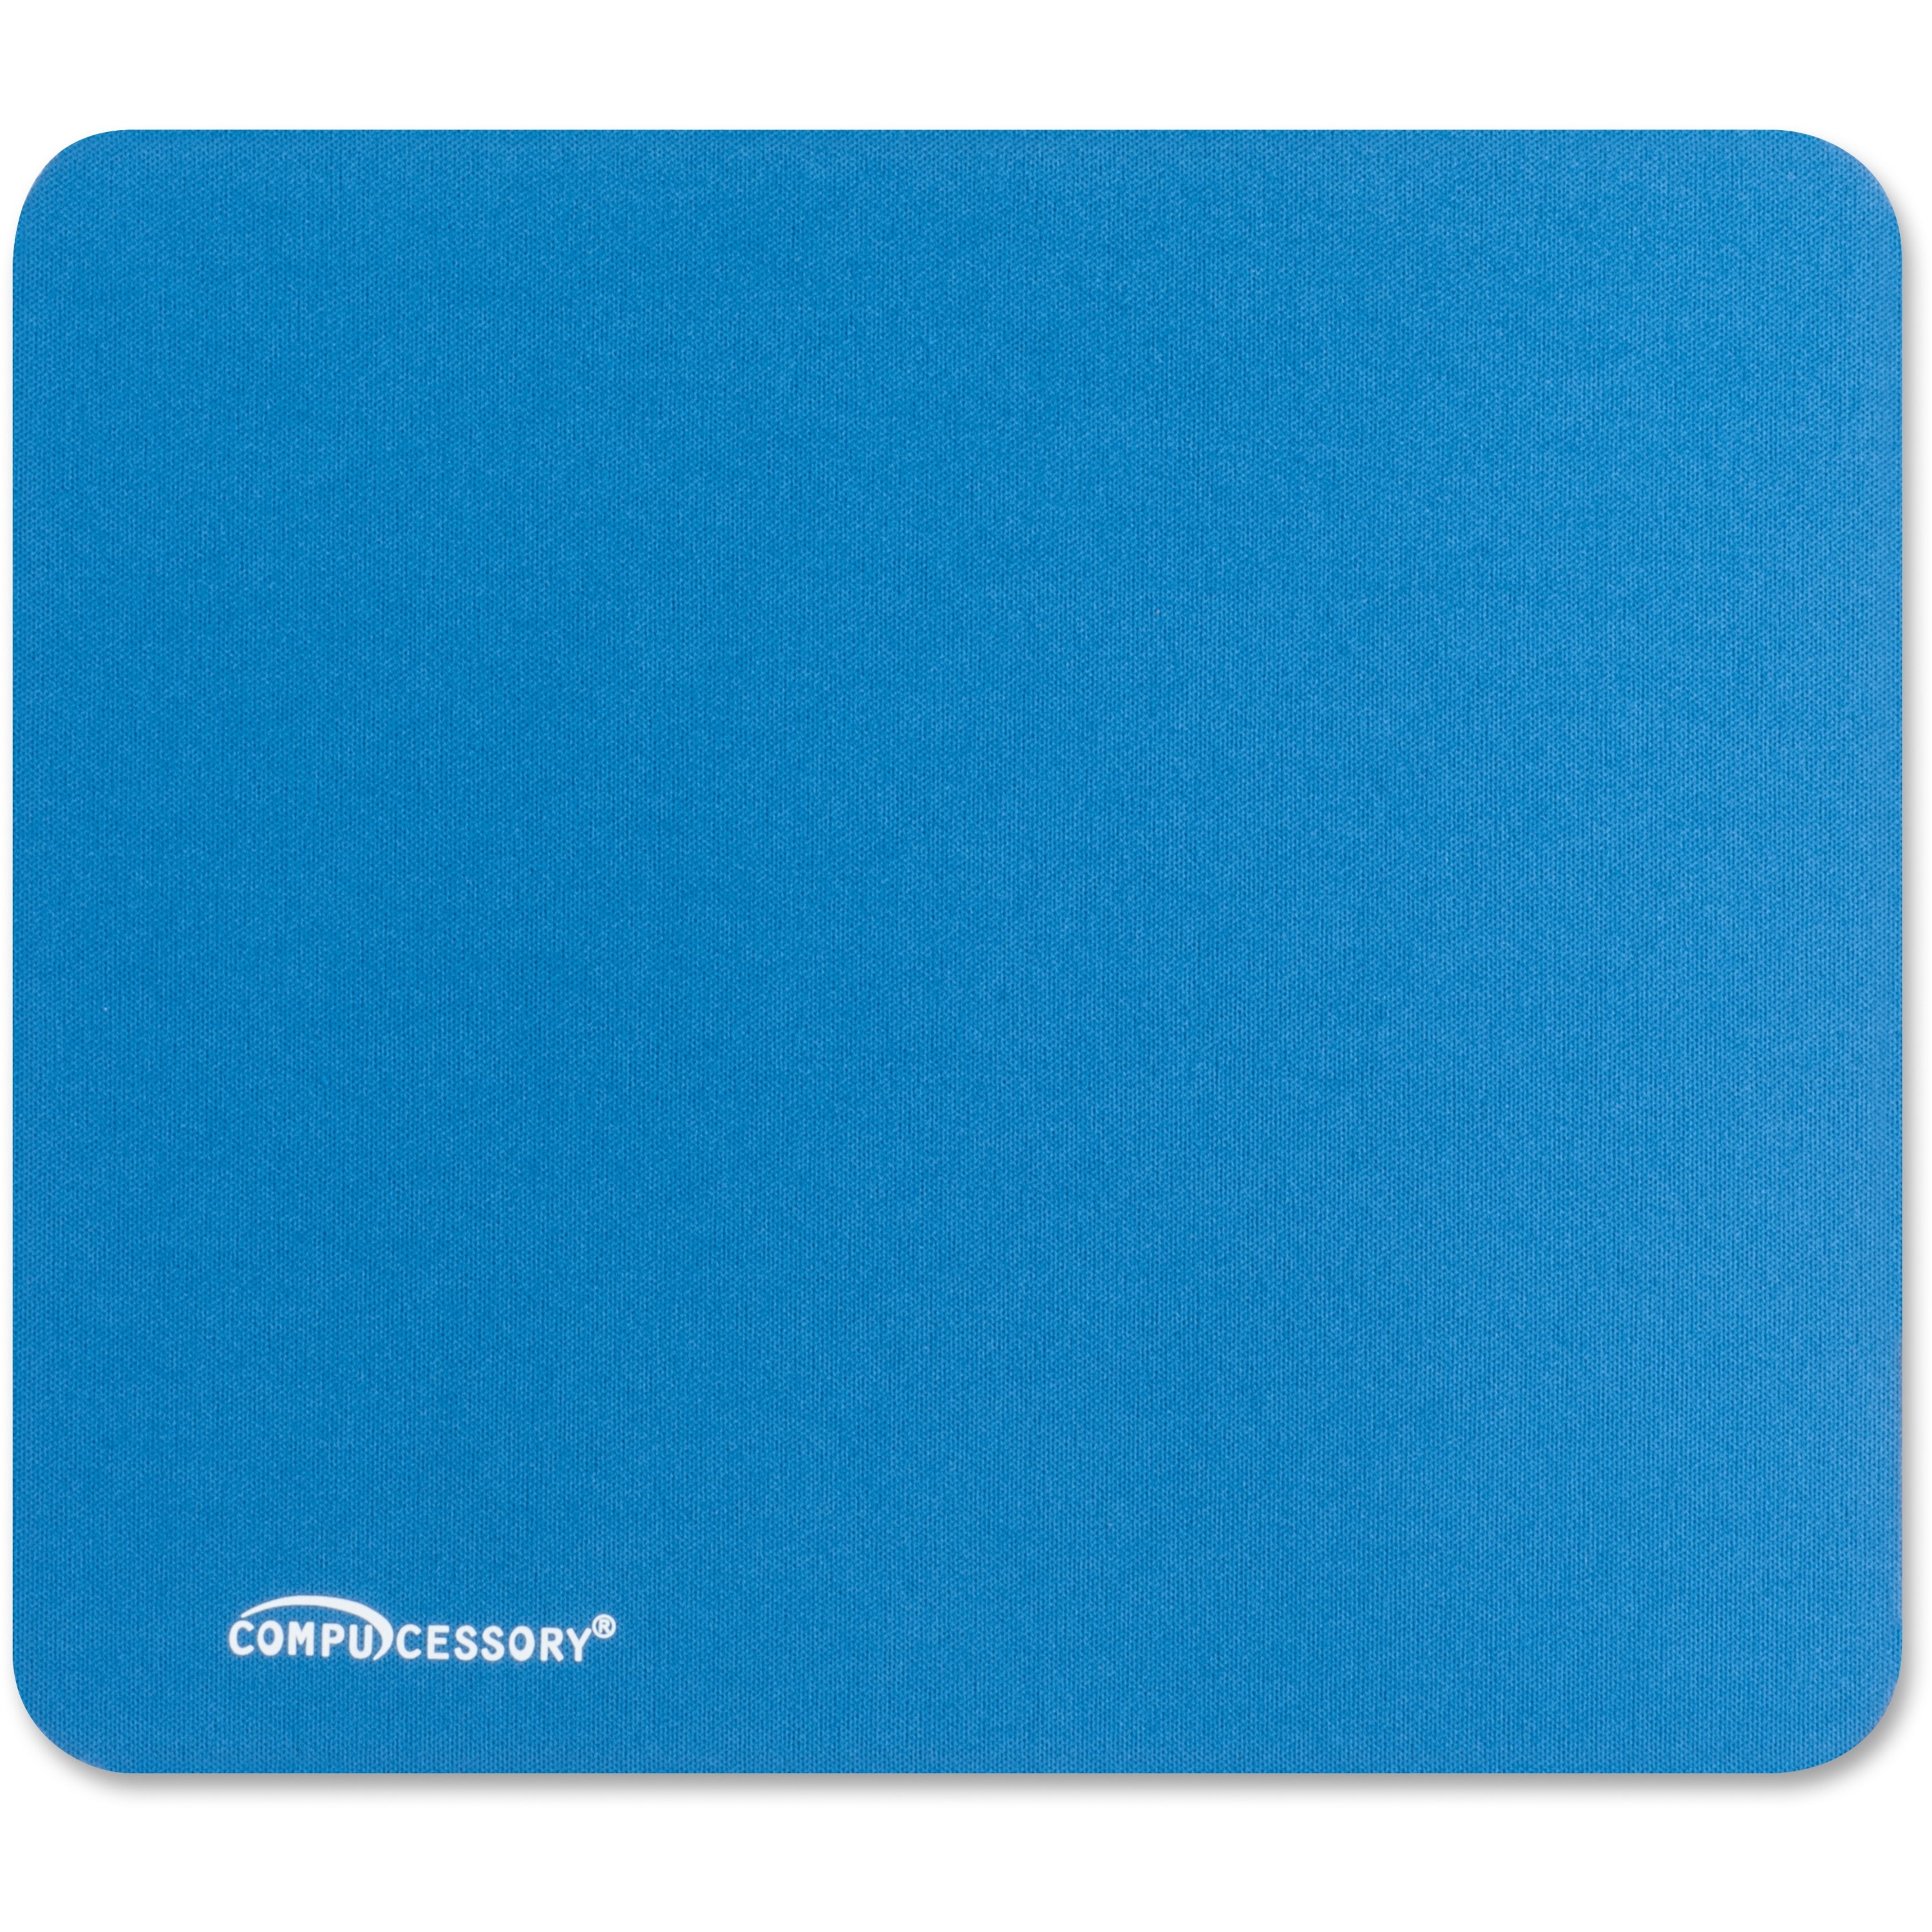 Compucessory Smooth Cloth Nonskid Blue Mouse Pads - Each